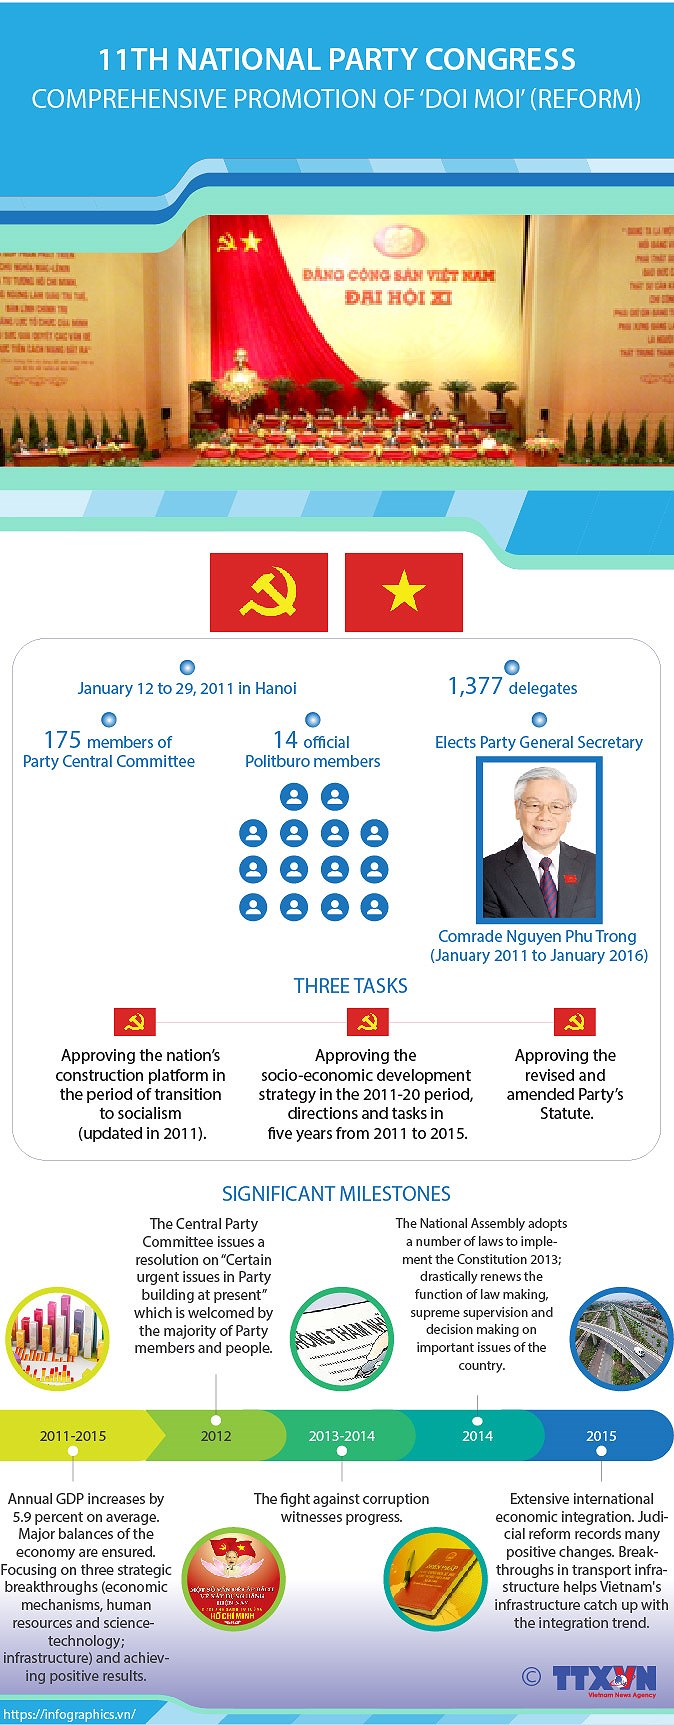 11th Party Congress: Comprehensive promotion of 'doi moi' (reform) hinh anh 1